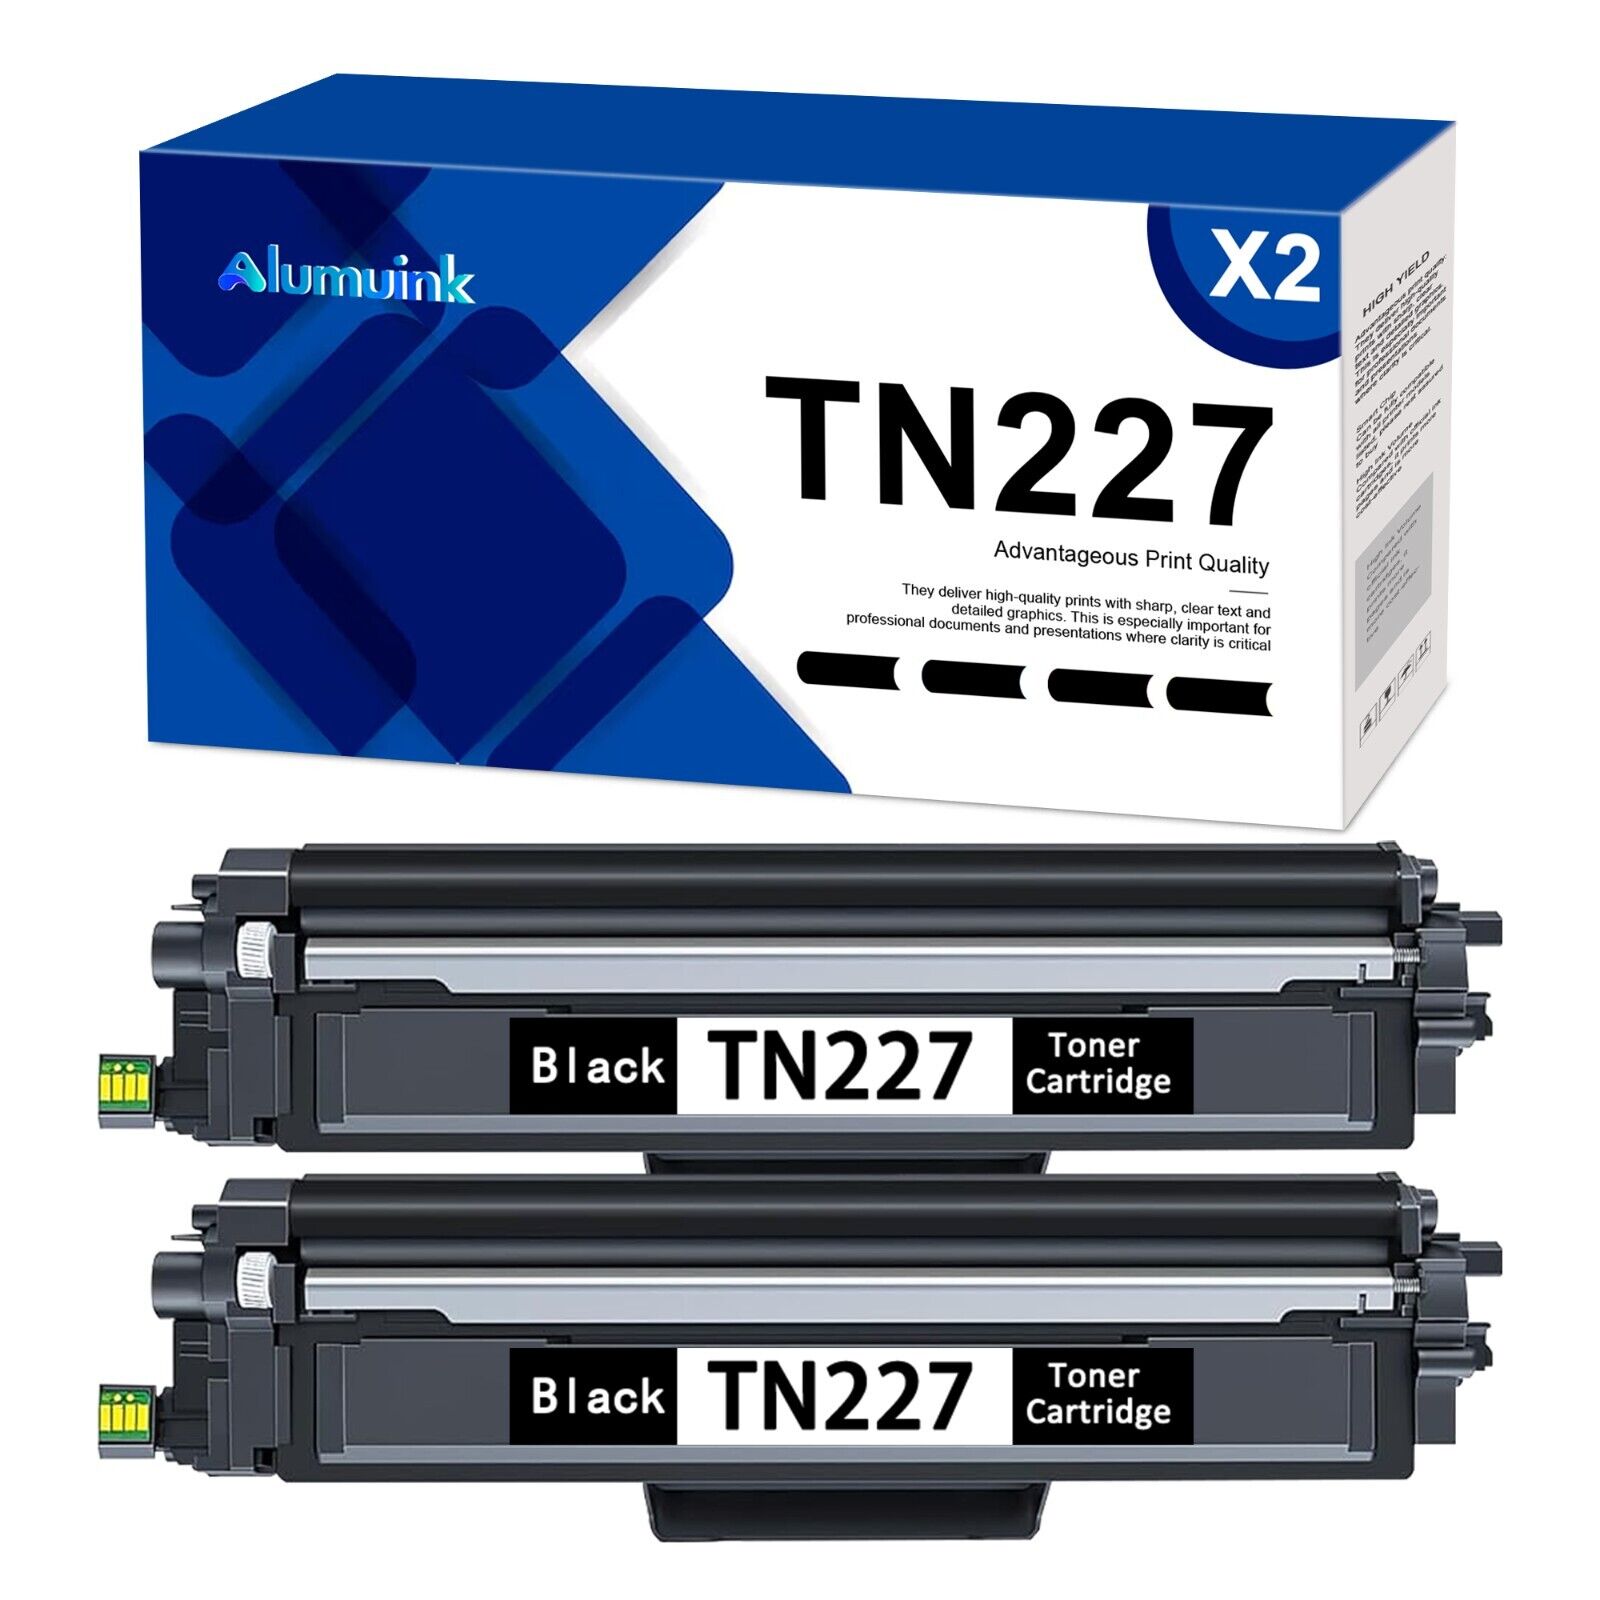 2PK TN227BK High Yield Toner Cartridge Replacement for Brother Up to 3,000 Page